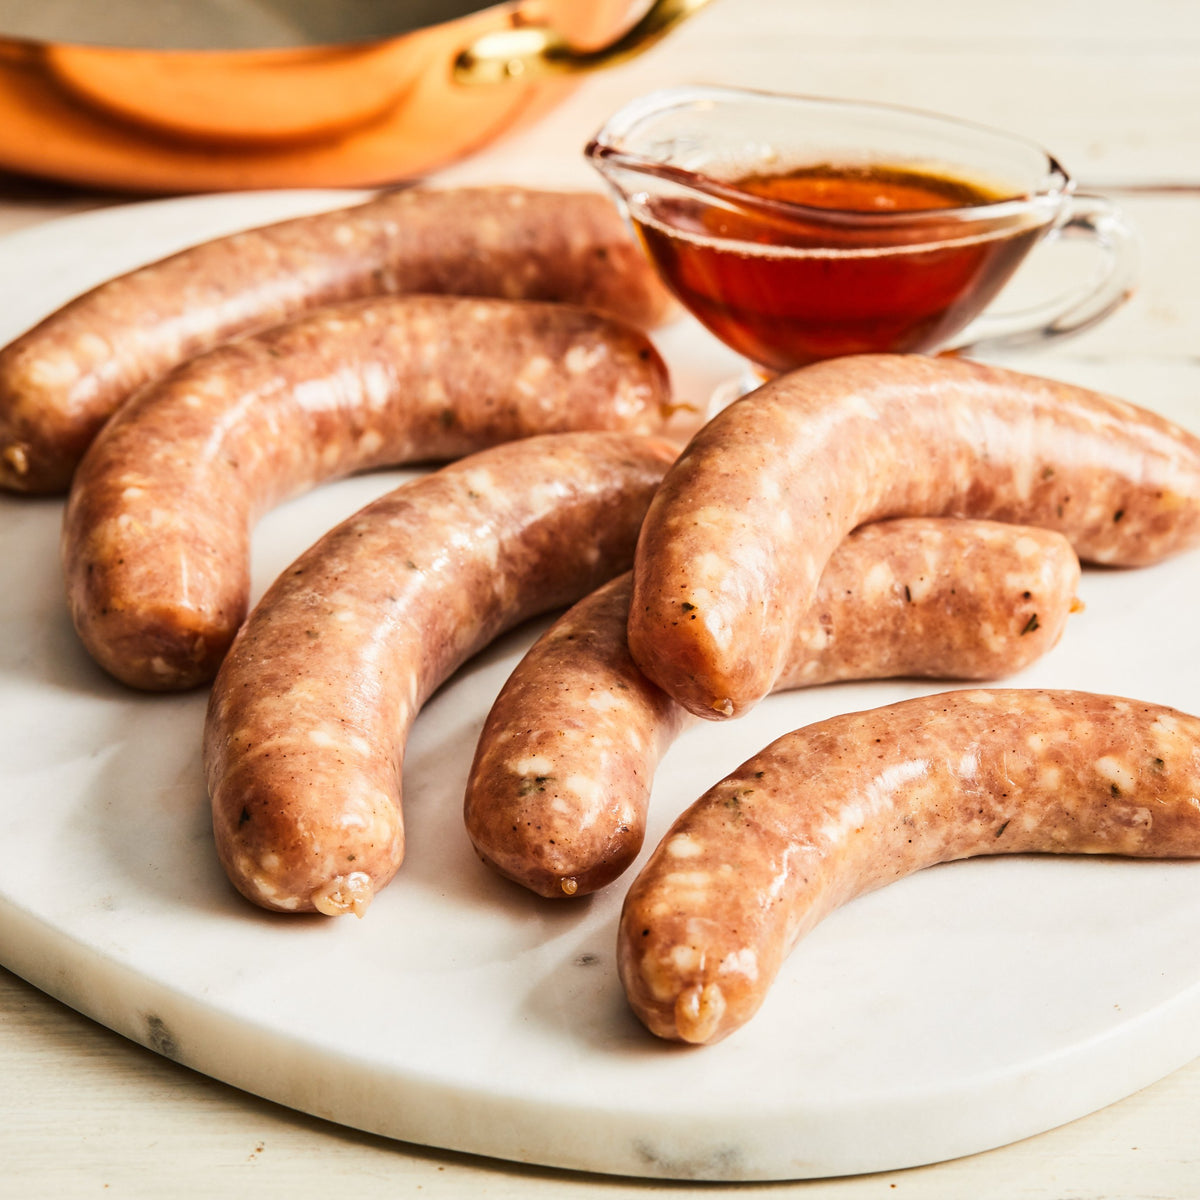 Image of Chicken Maple Breakfast Sausage. 6 links, about 1 lb. this uncooked breakfast sausage is a blend of chicken and pork seasoned with ginger, bourbon, applesauce, and a variety of spices